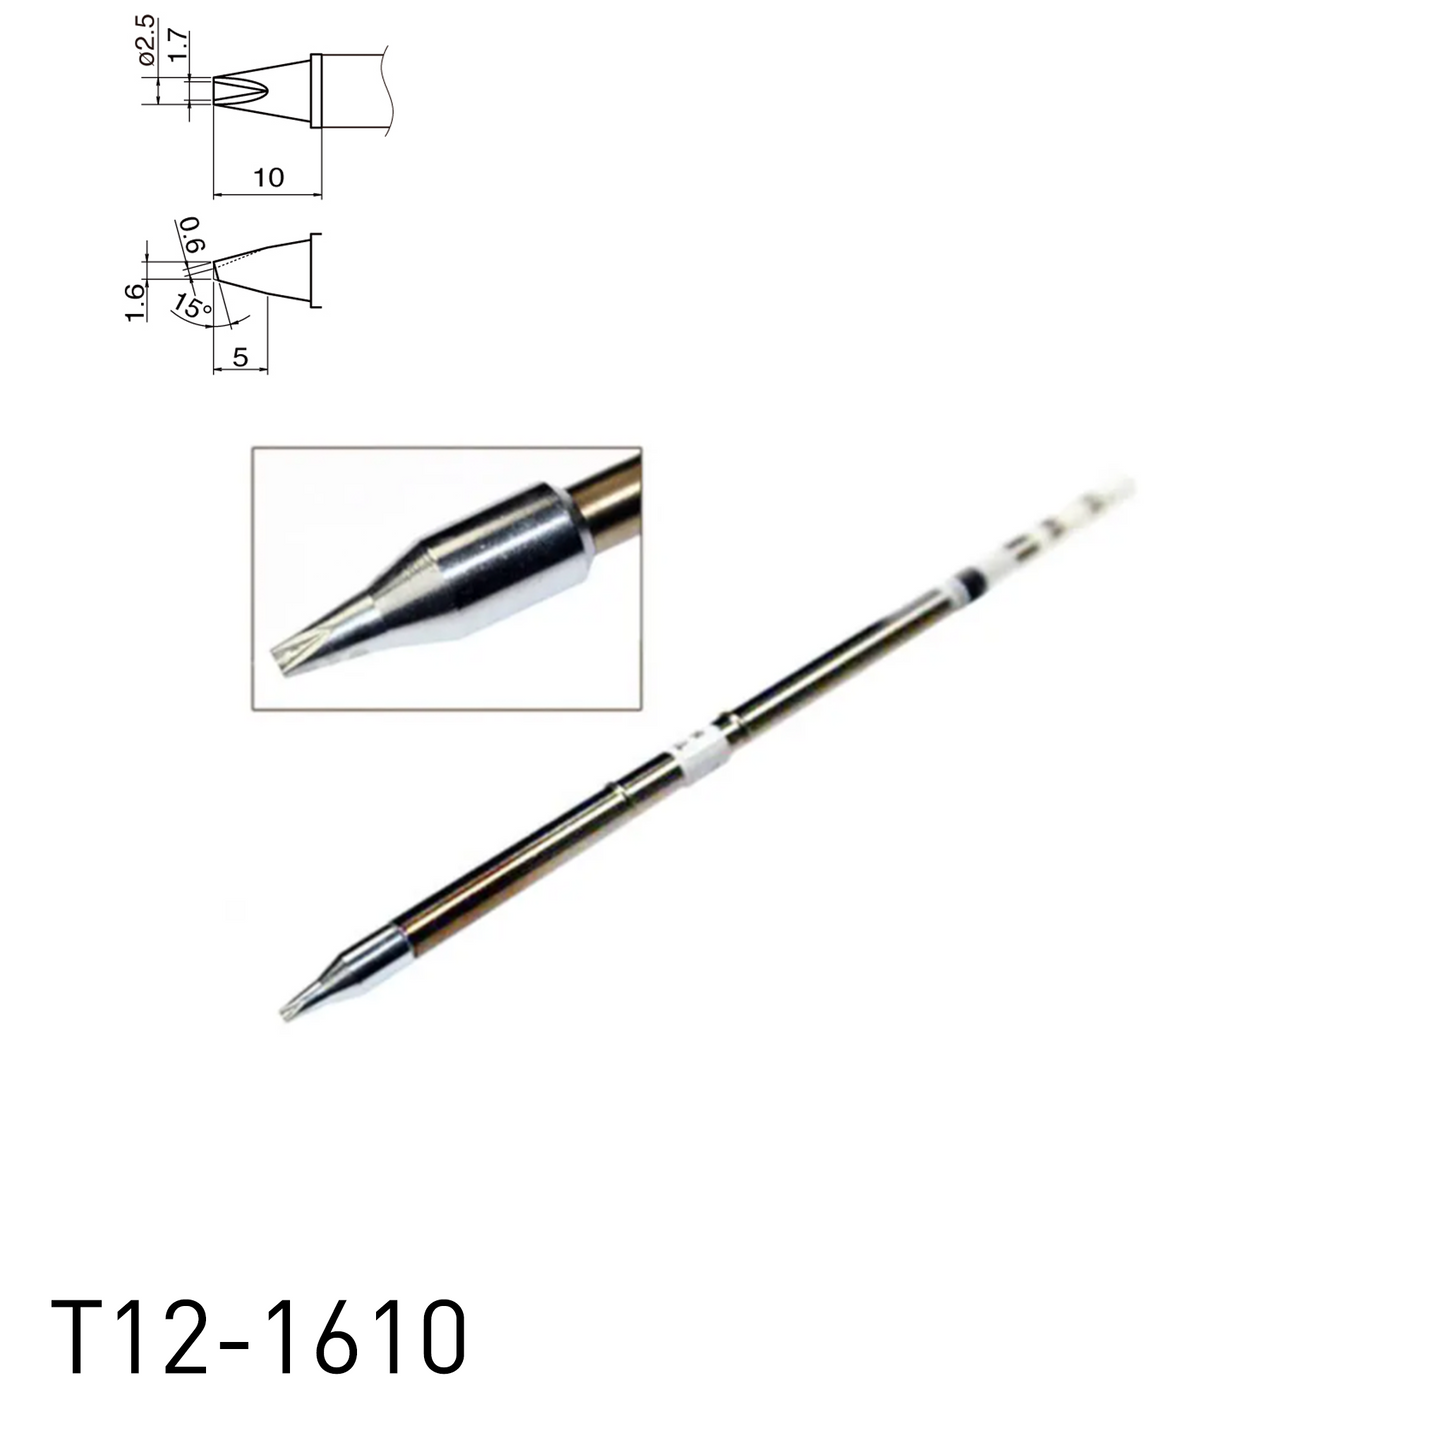 Hakko Products_ T12-1610 with V-groove Shape Concave_ Soldering Tips_ Hakko Products